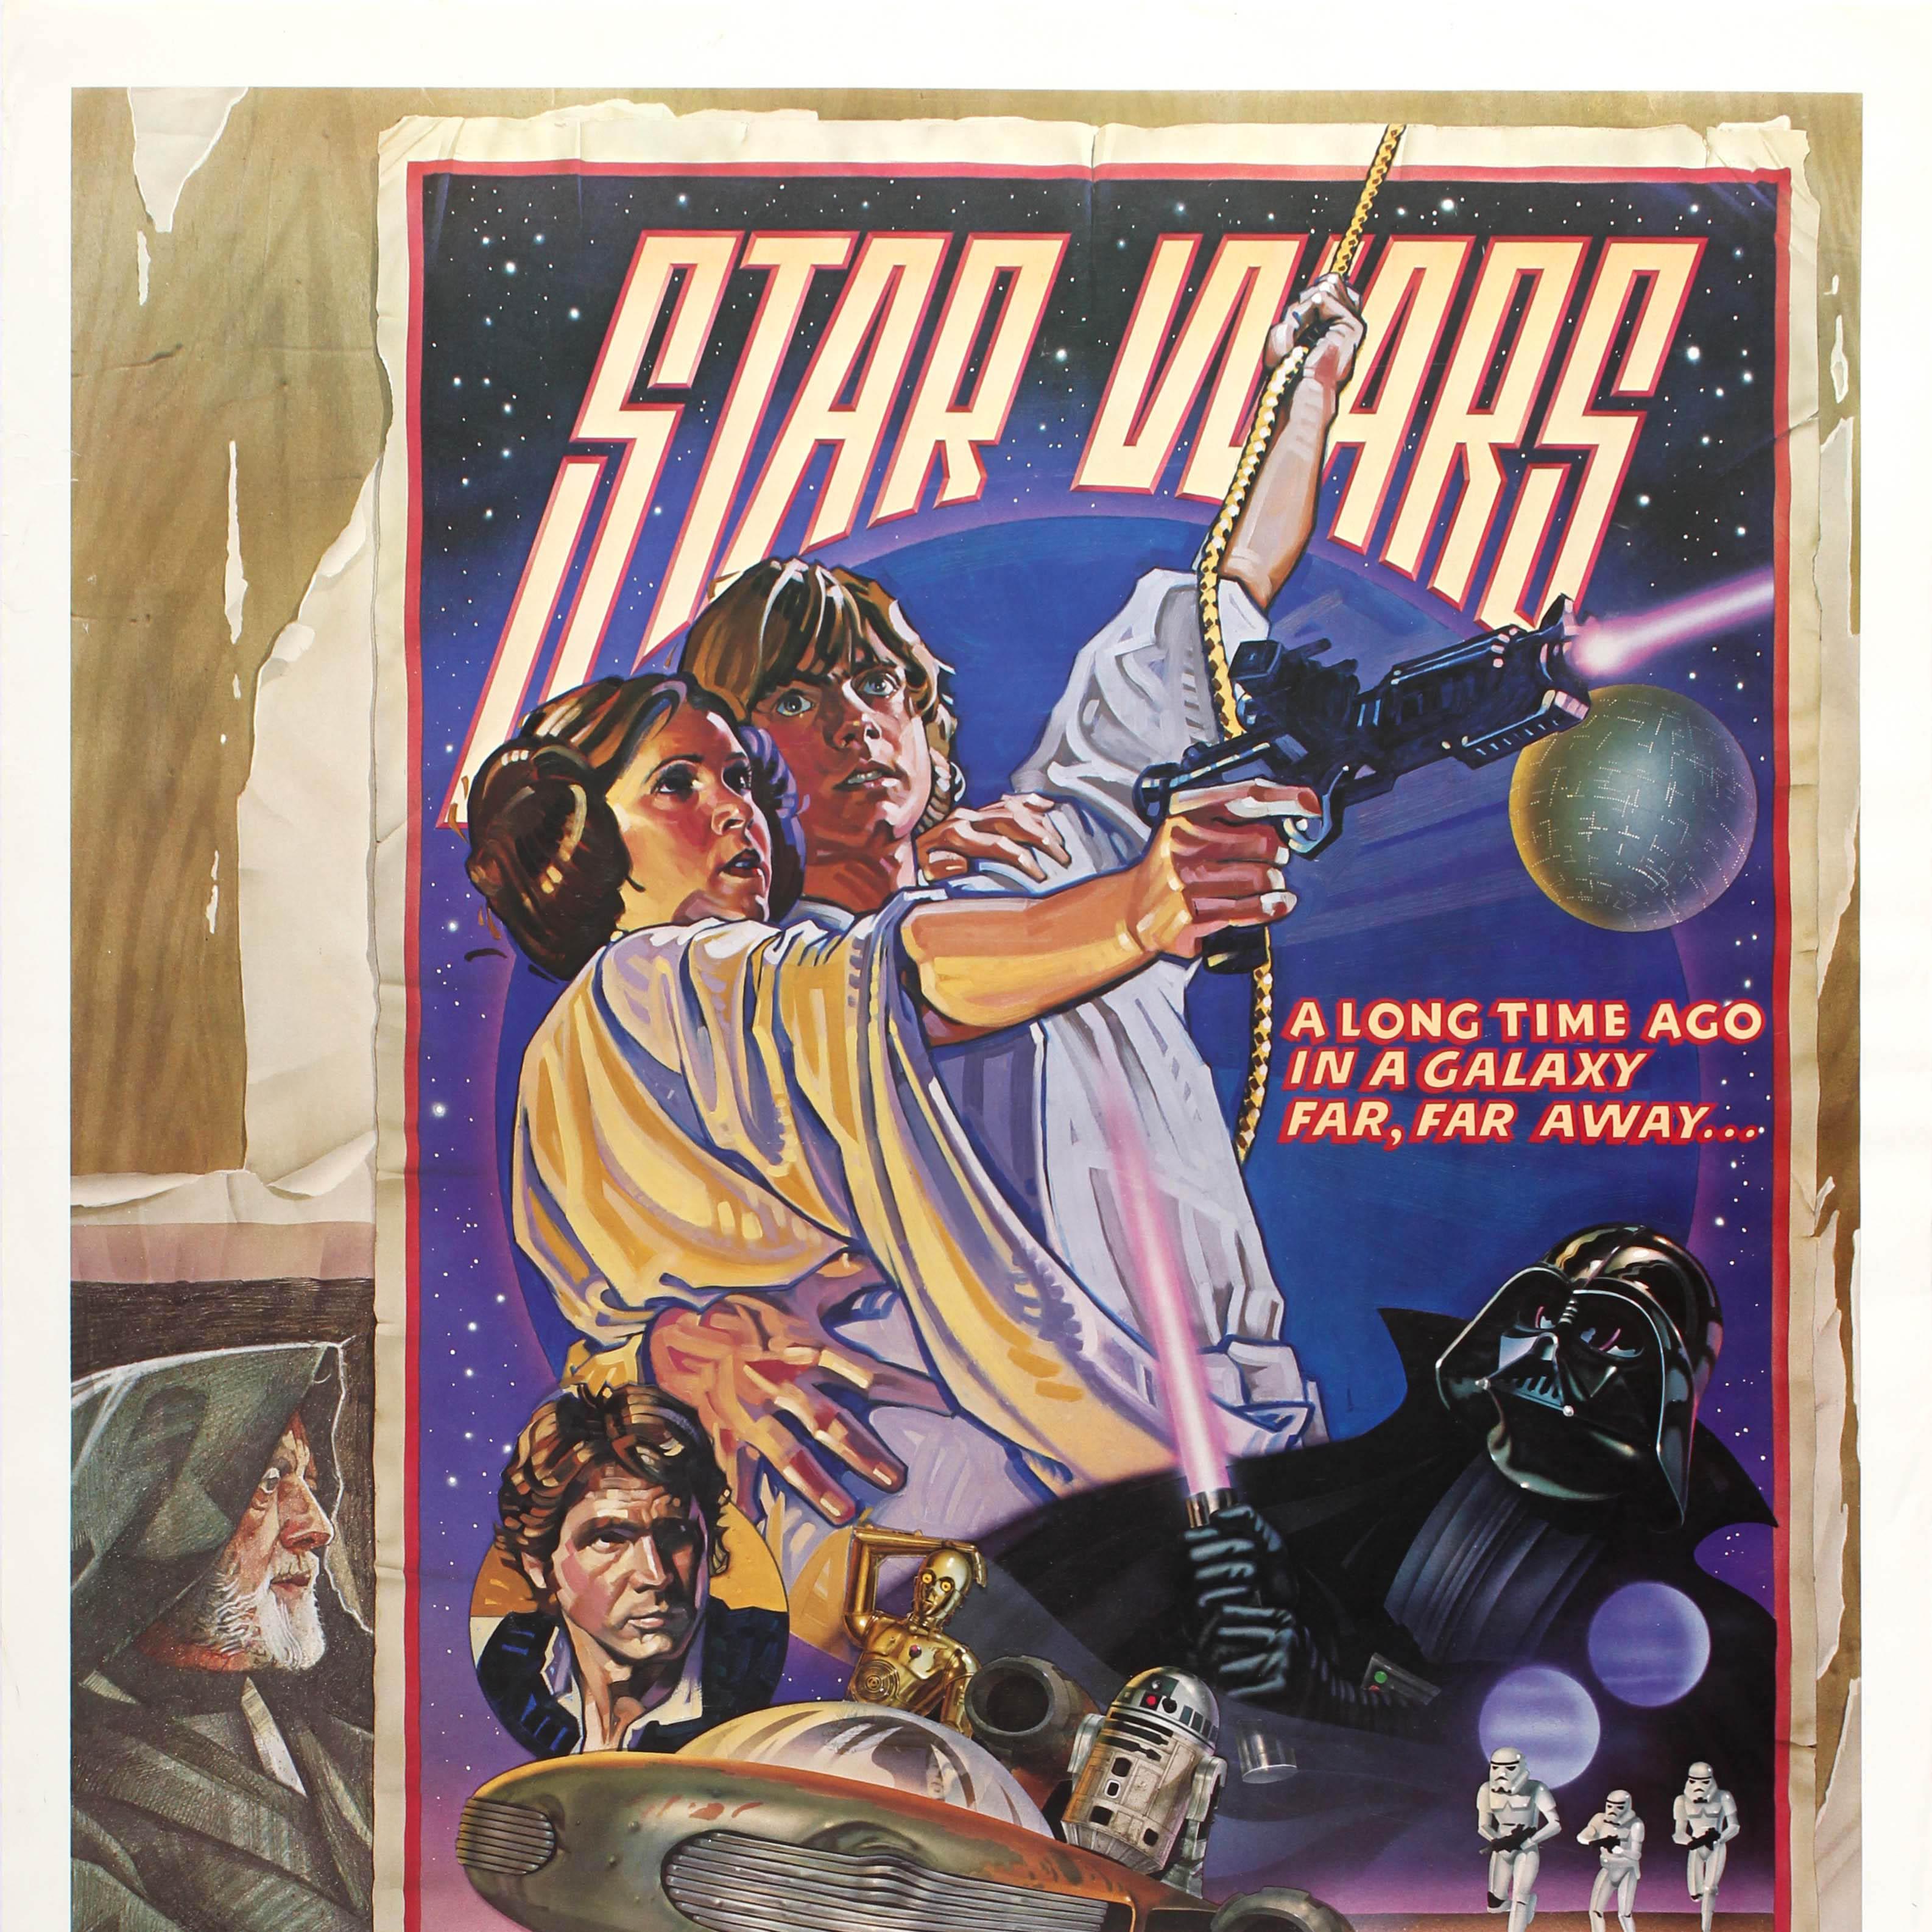 Original vintage movie poster for the classic film directed by George Lucas - Star Wars: Episode IV A New Hope - starring Mark Hamill as Luke Skywalker, Harrison Ford as Han Solo, Peter Mayhew as Chewbacca, Carrie Fisher as Princess Leia, Alec